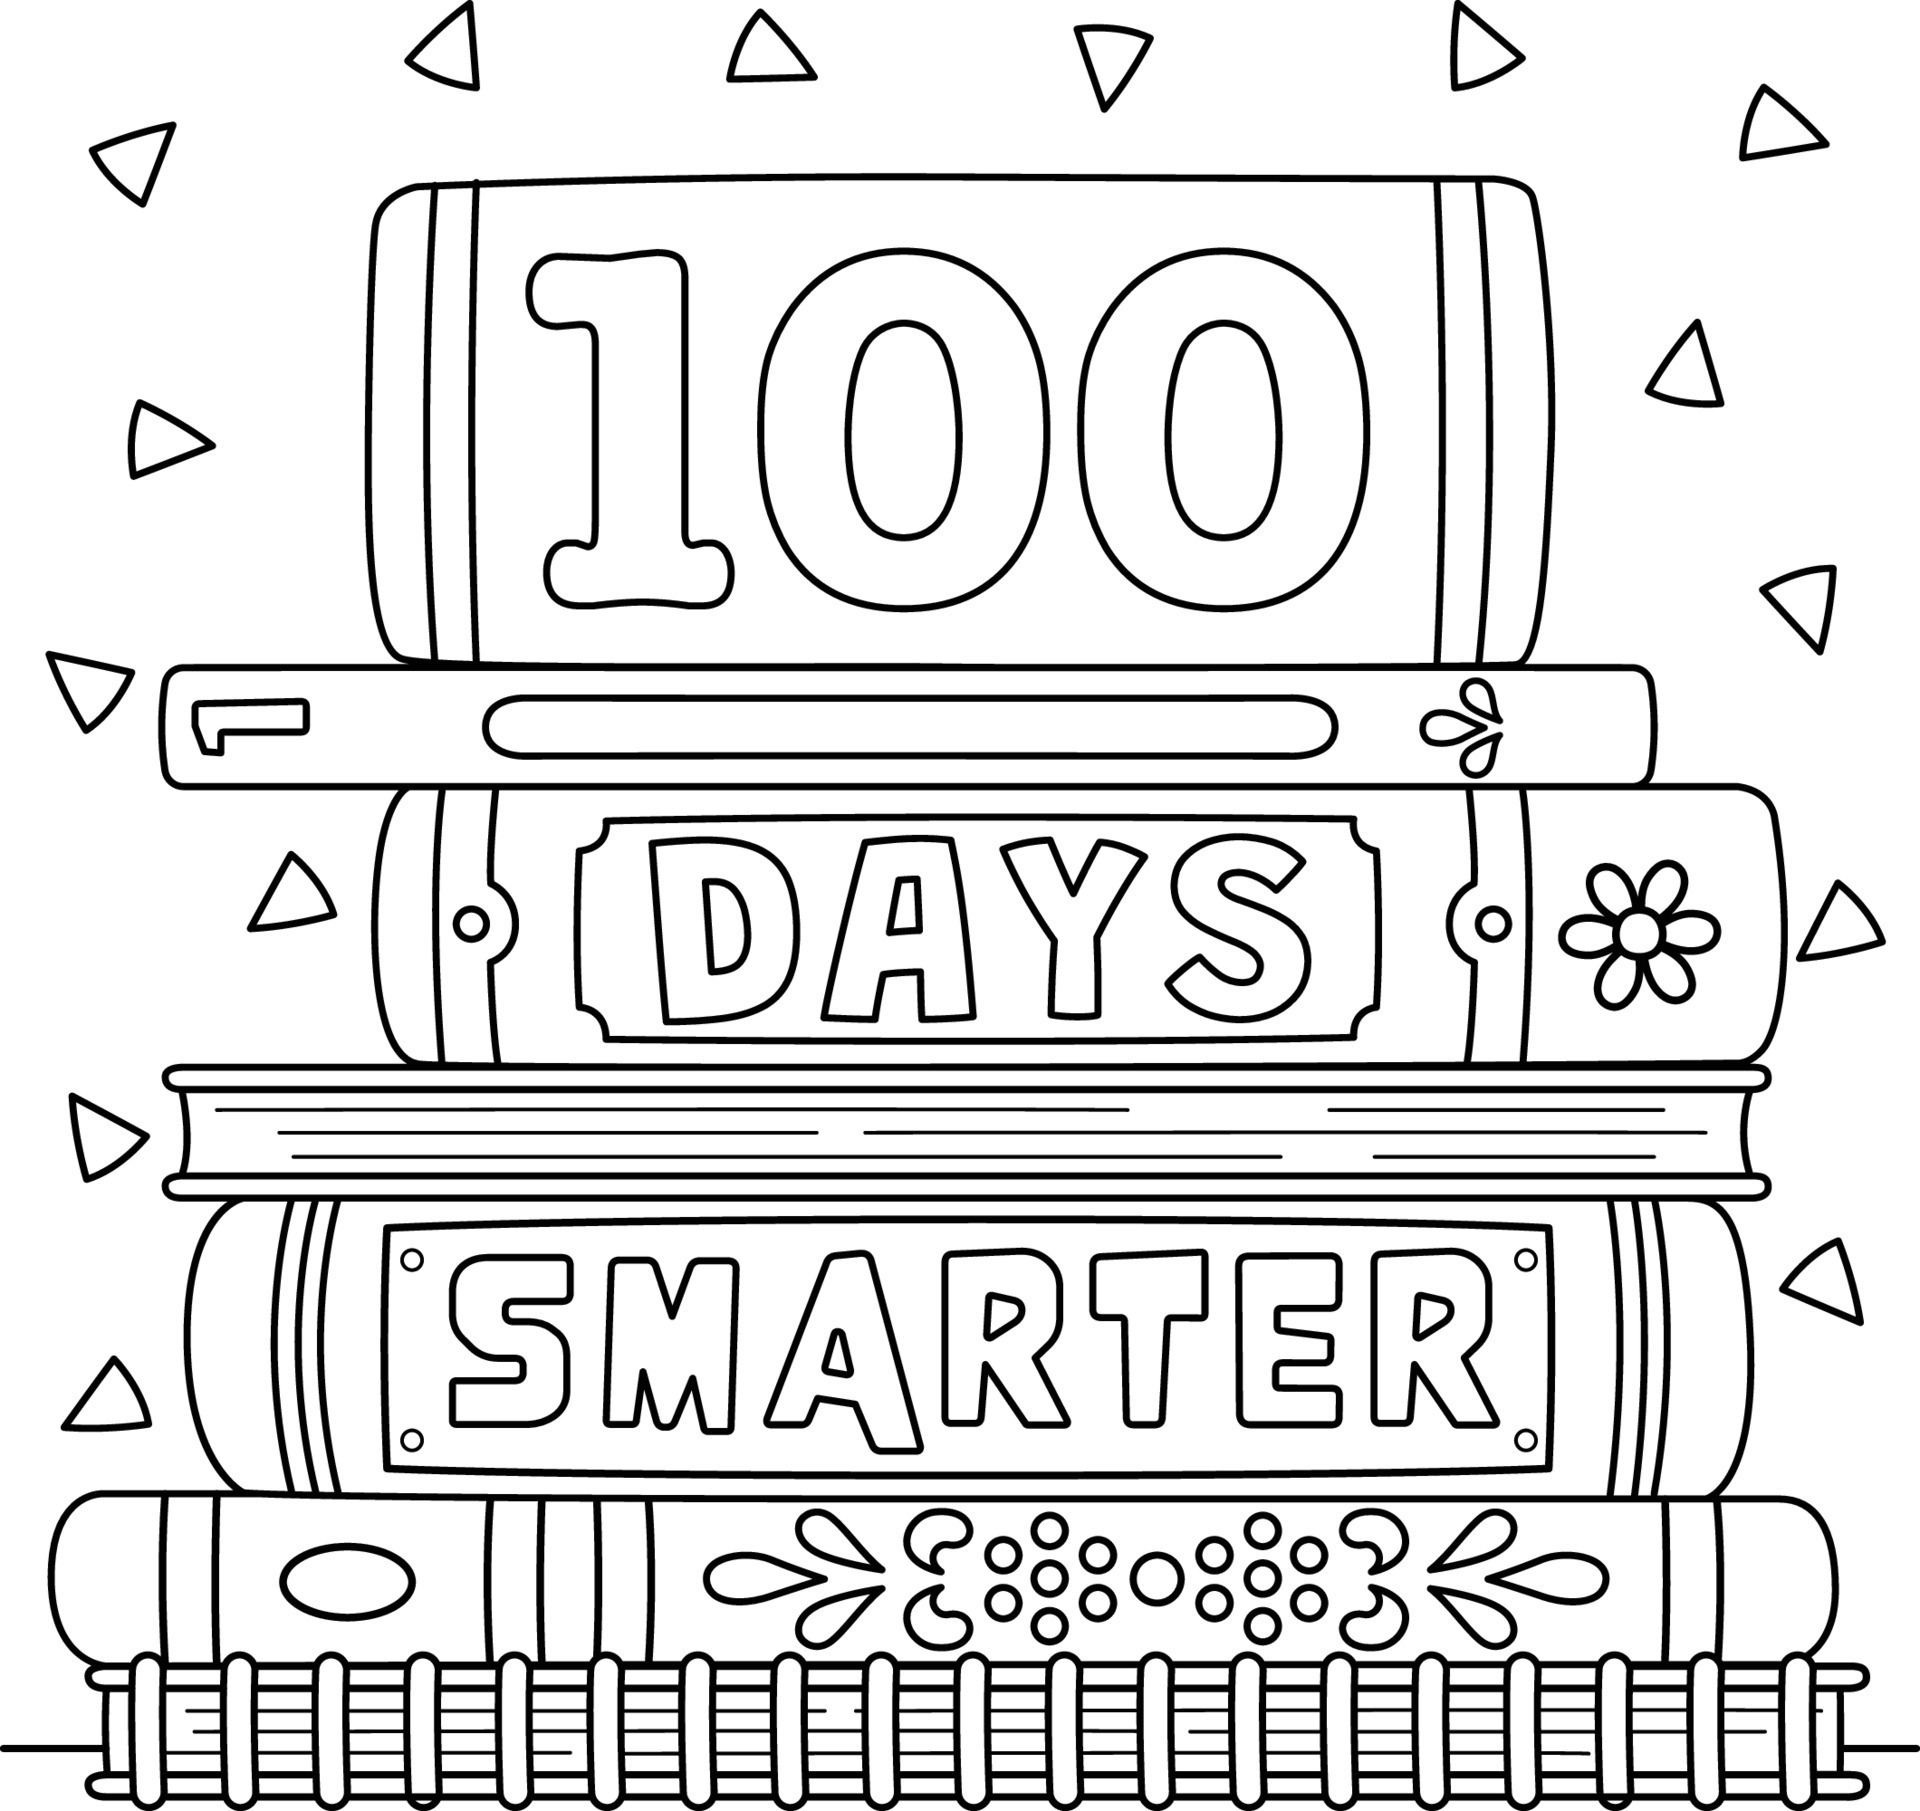 100th-day-of-school-smarter-coloring-page-for-kids-14329711-vector-art-at-vecteezy